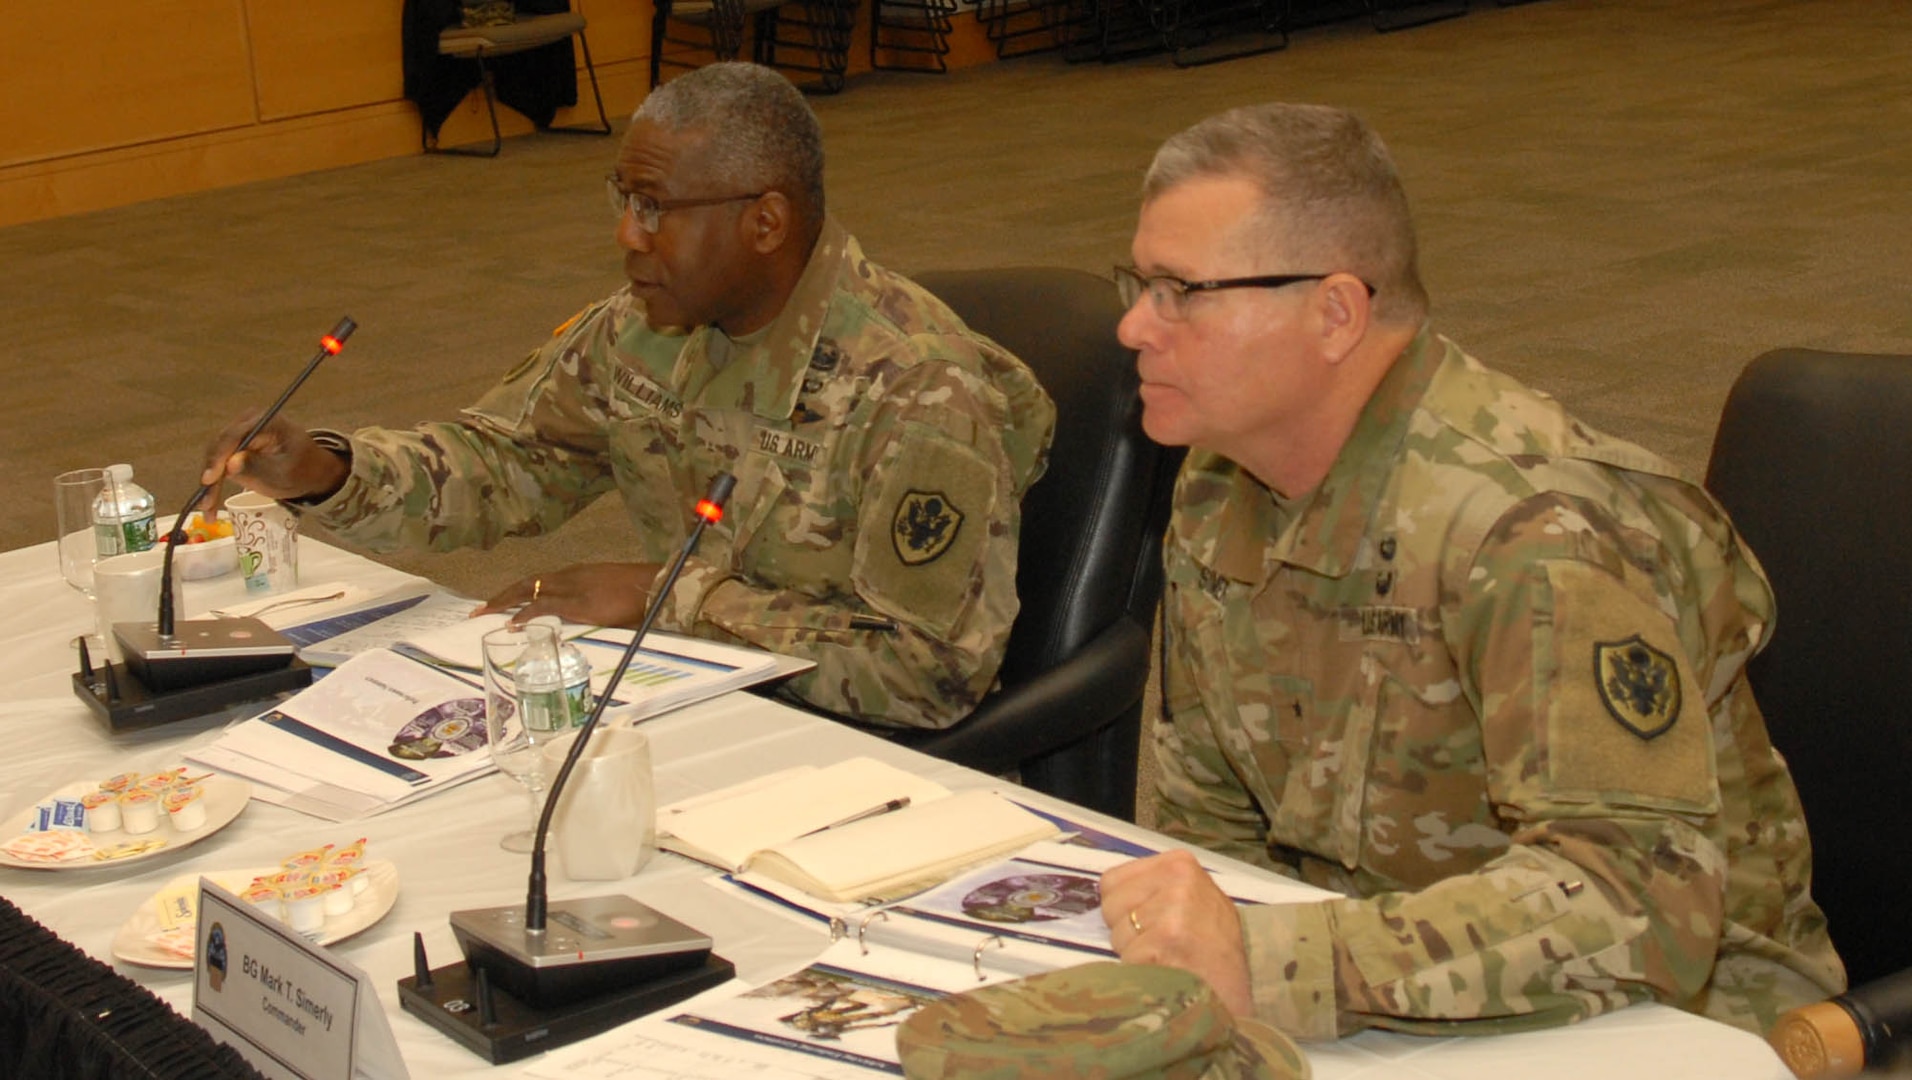 DLA Director Army Lt. Gen. Darrell K. Williams (left) and DLA Troop Support Commander Brig. Gen. Mark Simerly (right) listen as Troop Support senior leaders discuss key topics during a Dynamic Operating Plan review meeting at DLA Troop Support in Philadelphia Dec. 7, 2018.